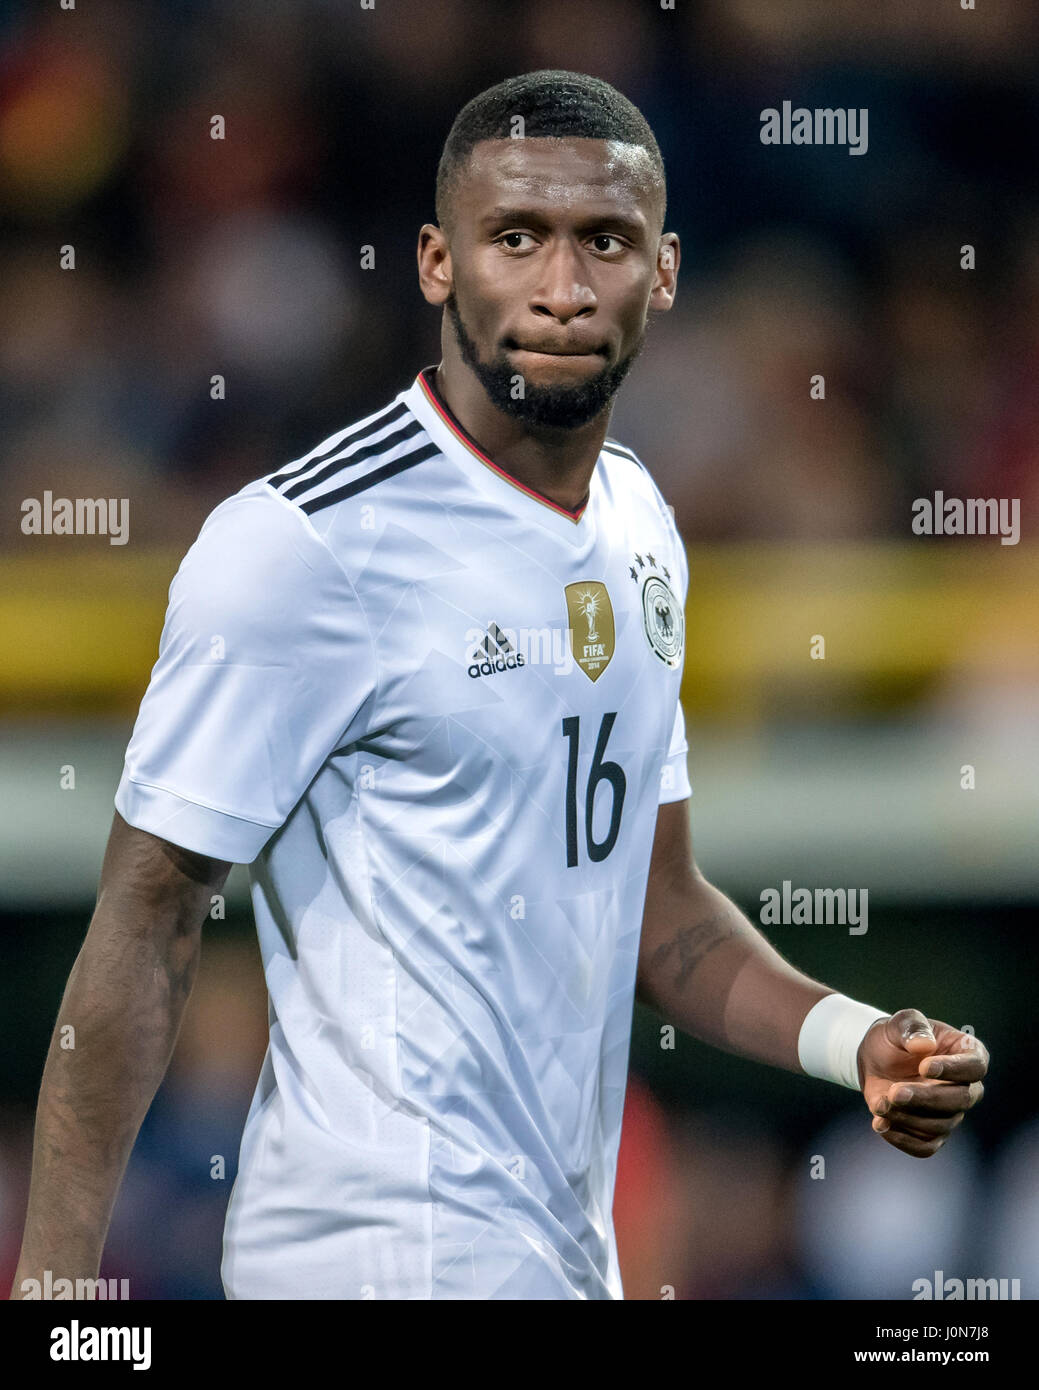 Germany's Antonio Ruediger in action during the national soccer match between Germany and England in the Signal Iduna Park, Dortmund, Germany, 22 March 2017. -NO WIRE SERVICE- Photo: Thomas Eisenhuth/dpa-Zentralbild/ZB Stock Photo